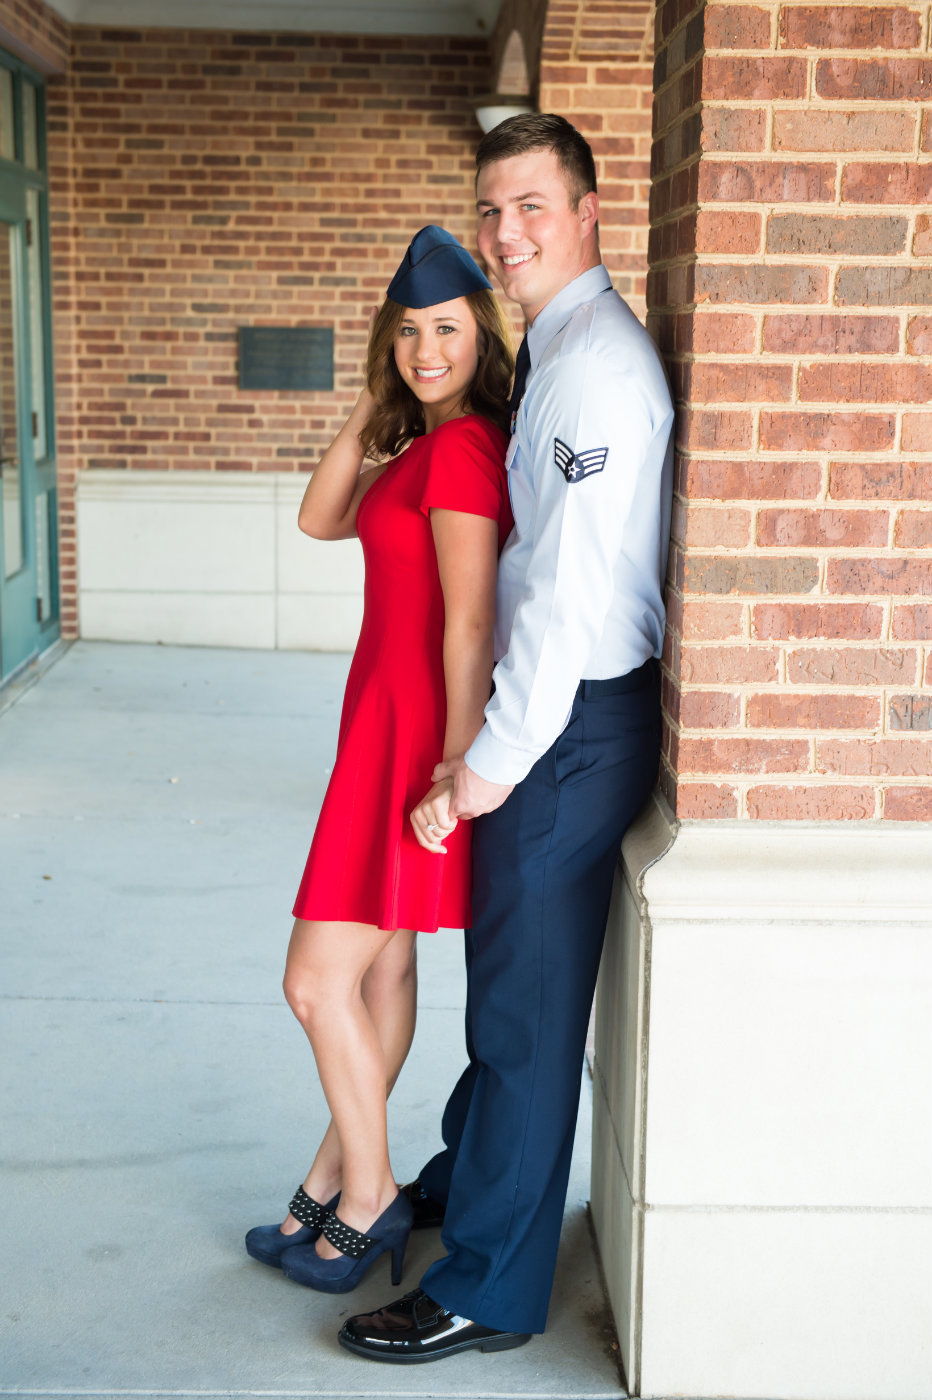 Military Engagement photos in Denton by Brittany Barclay Photography